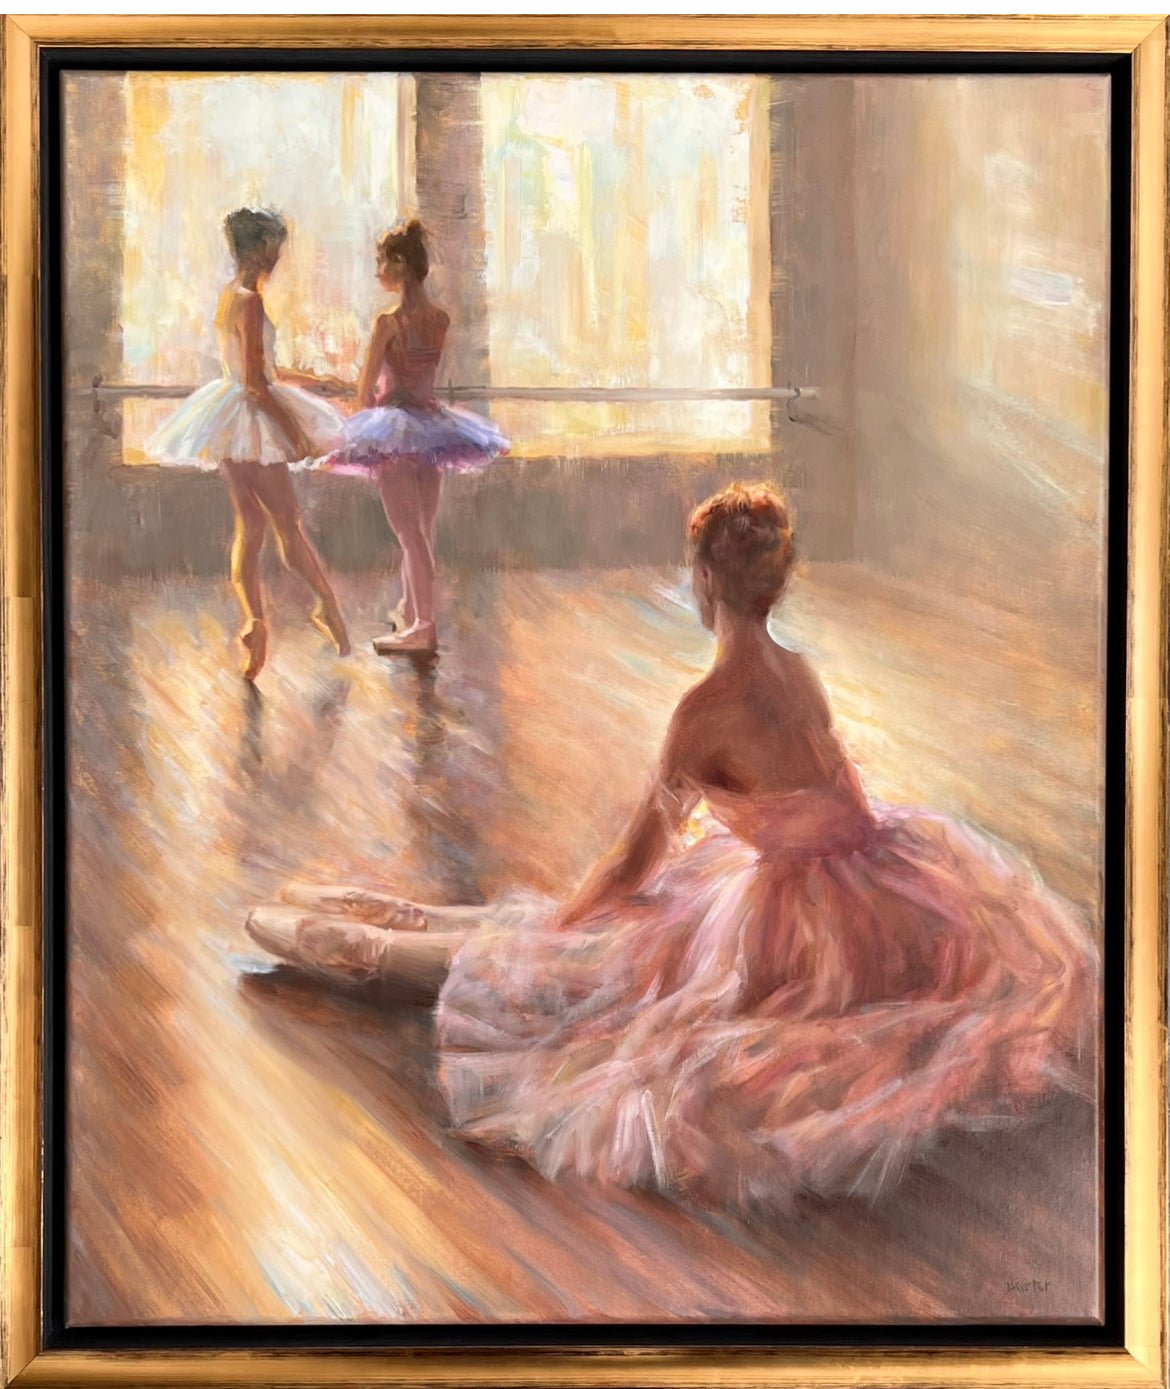 Golden Light in the Studio by Stacy Barter at LePrince Galleries